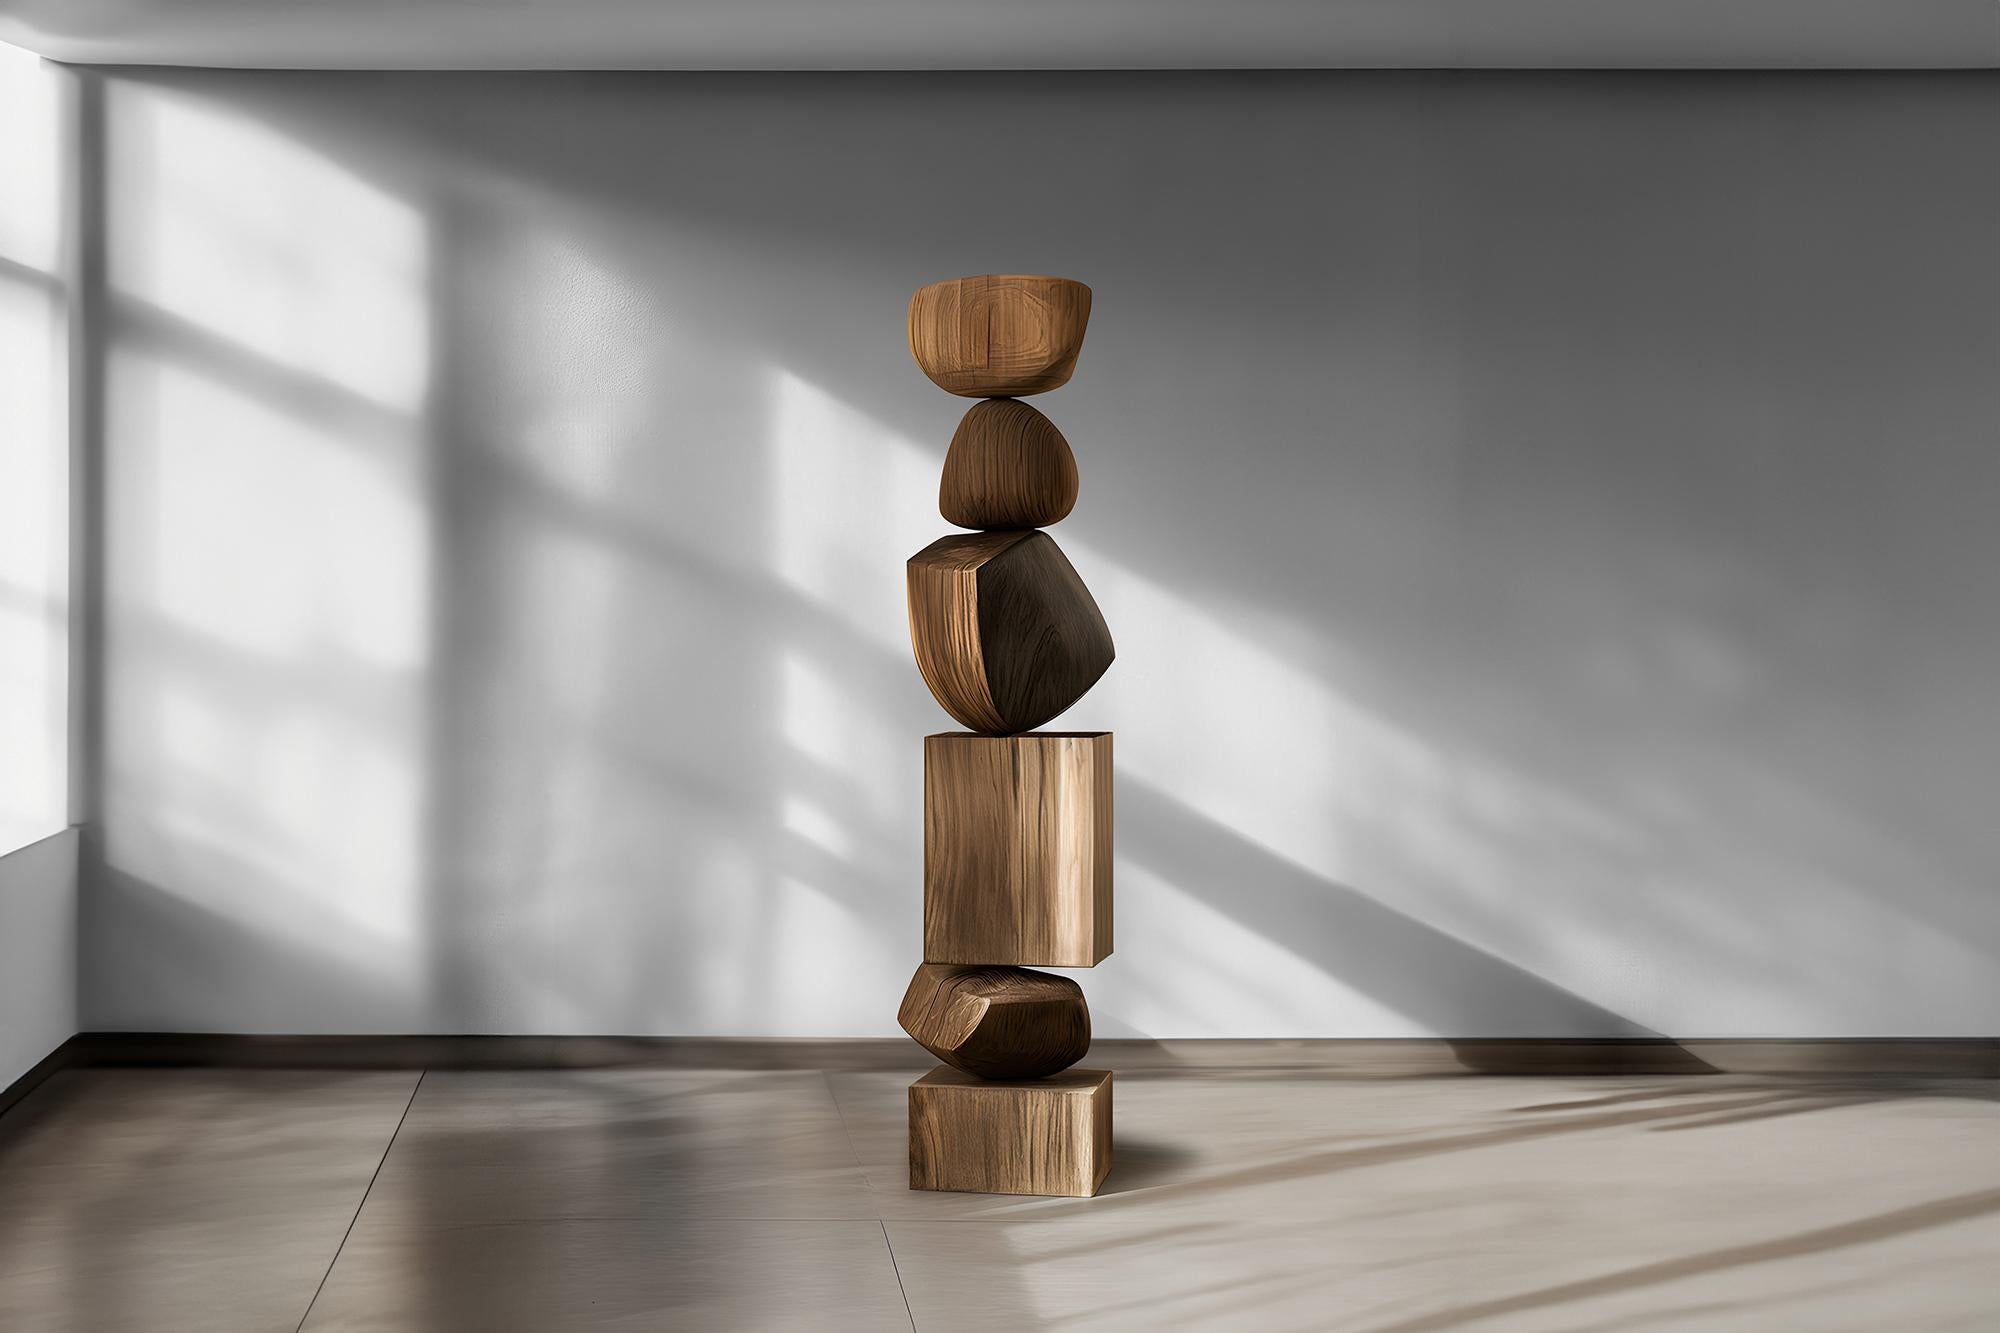 Modern Burned Oak Totem, a Design of Sleek Darkness, Still Stand No101
_
Joel Escalona's wooden standing sculptures are objects of raw beauty and serene grace. Each one is a testament to the power of the material, with smooth curves that flow into